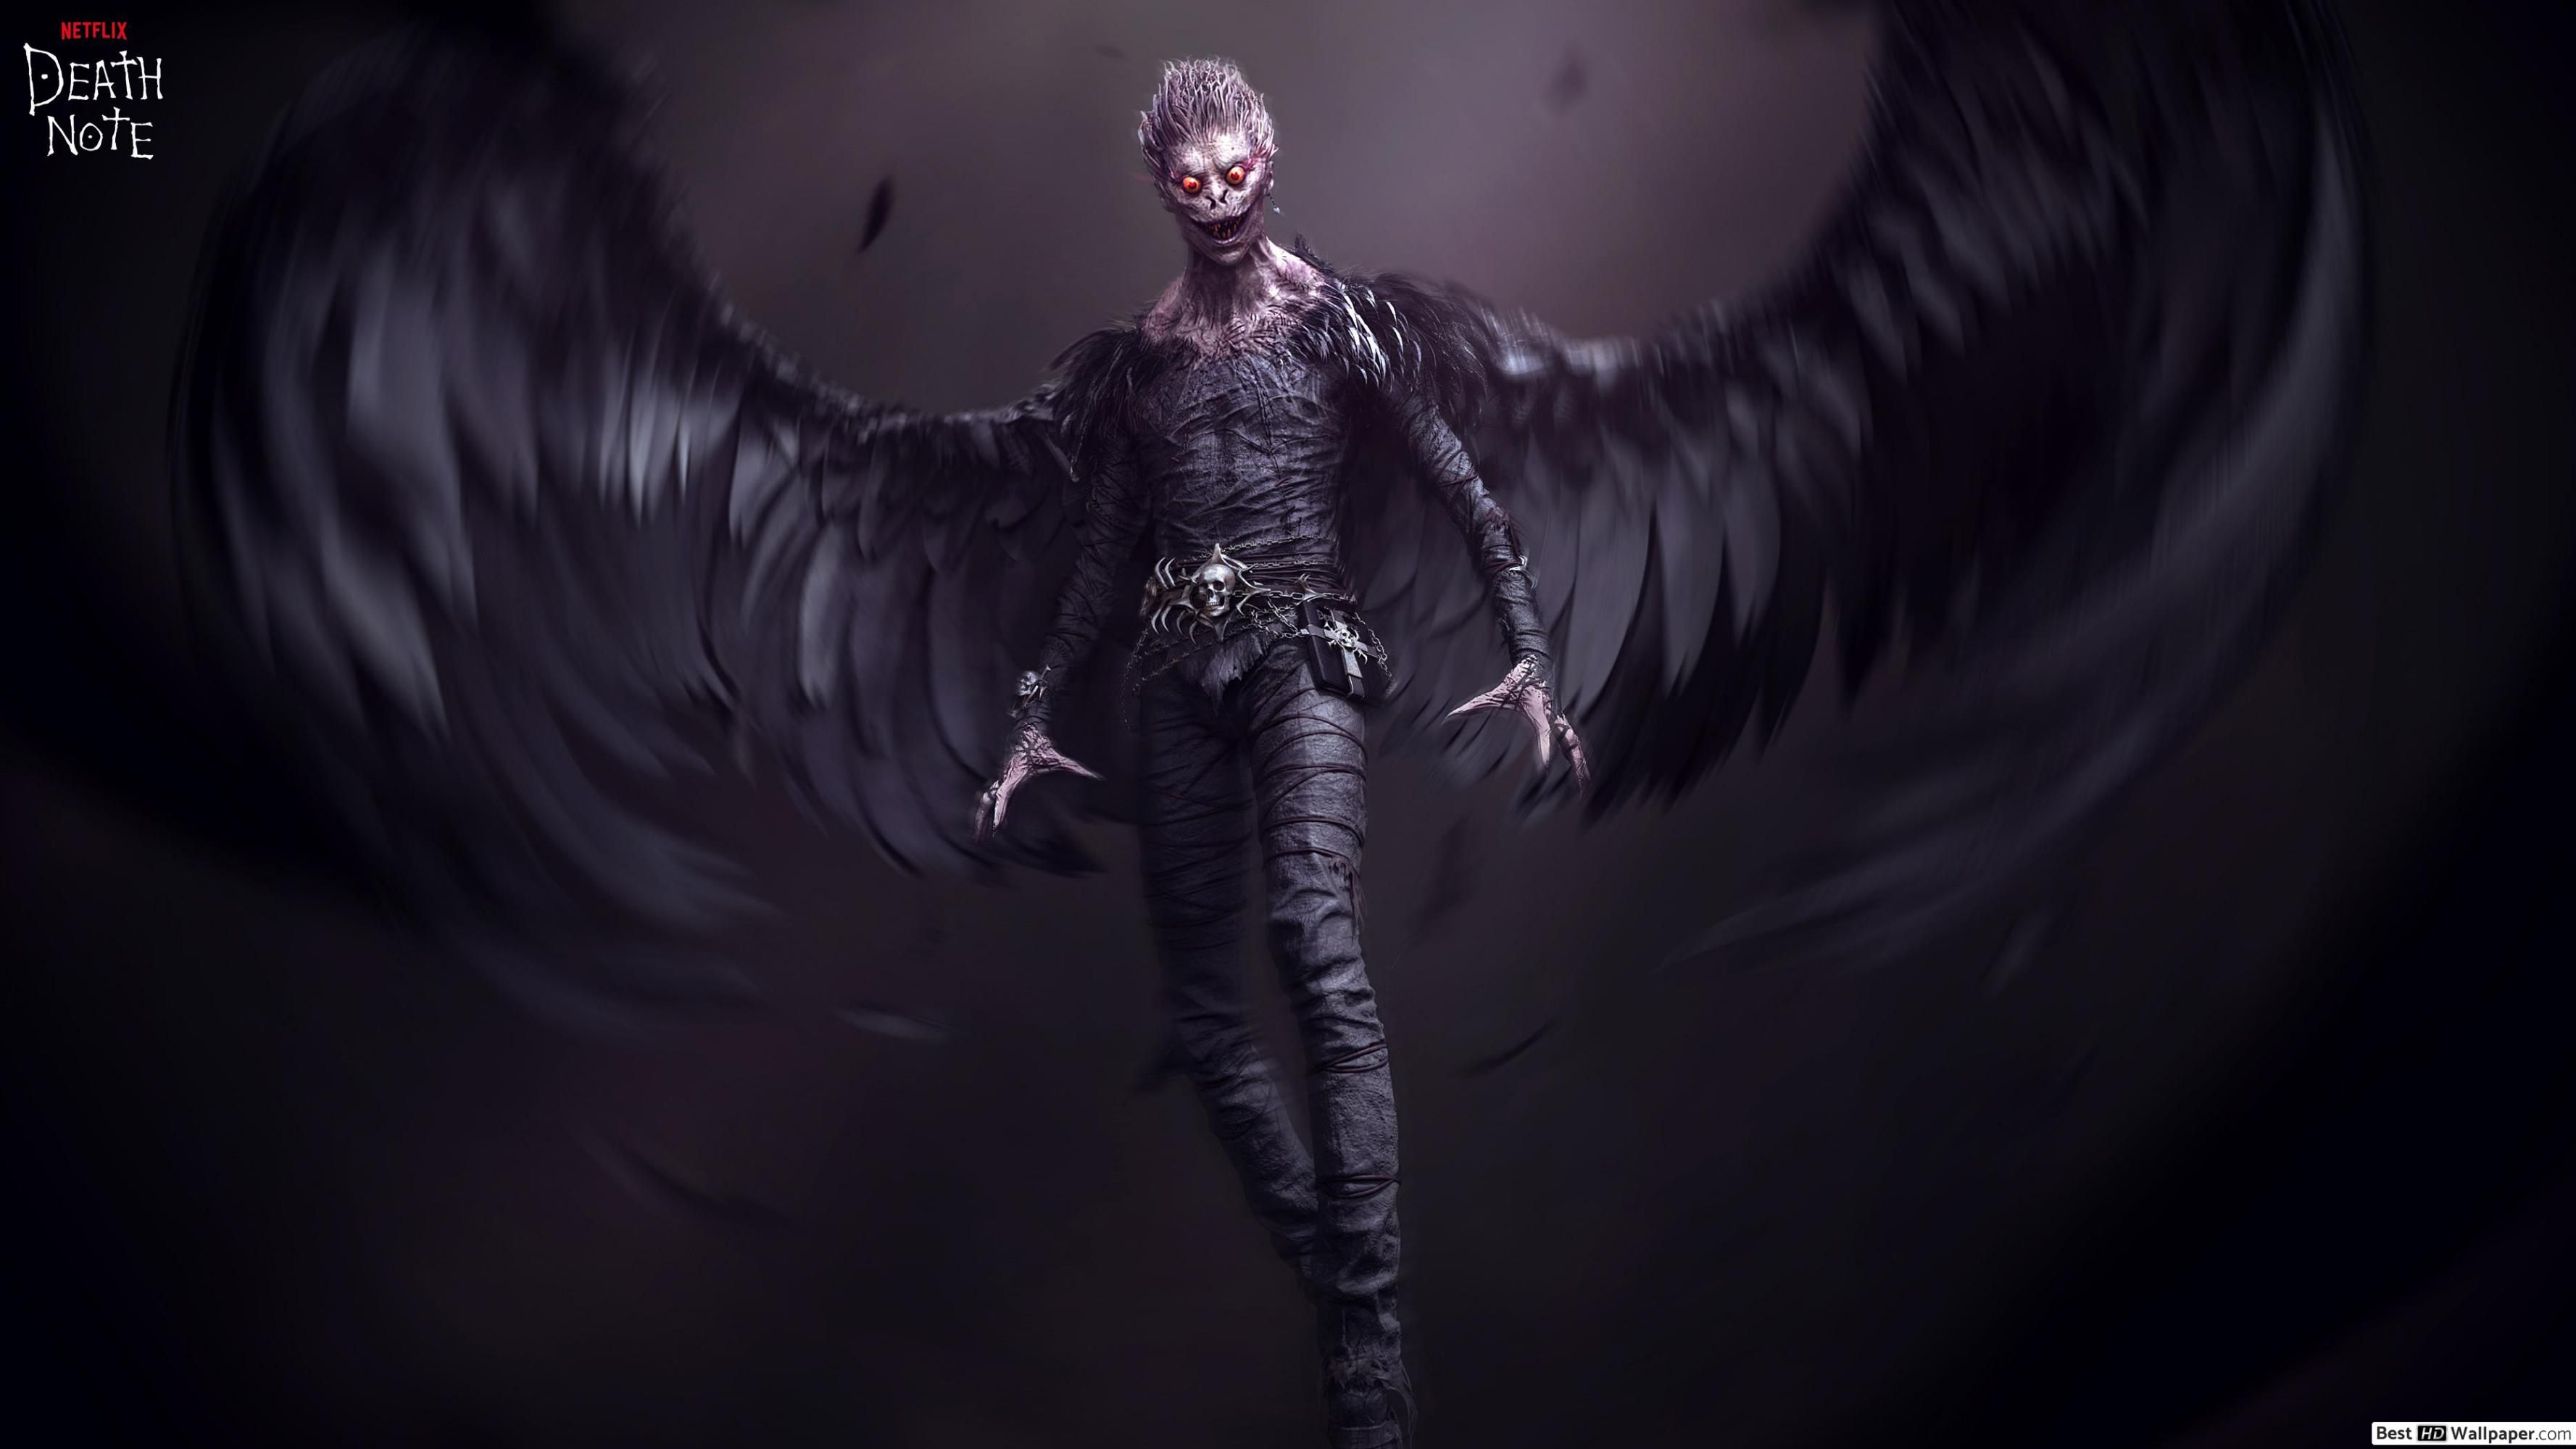 Ryuk from Death Note Anime HD wallpaper download